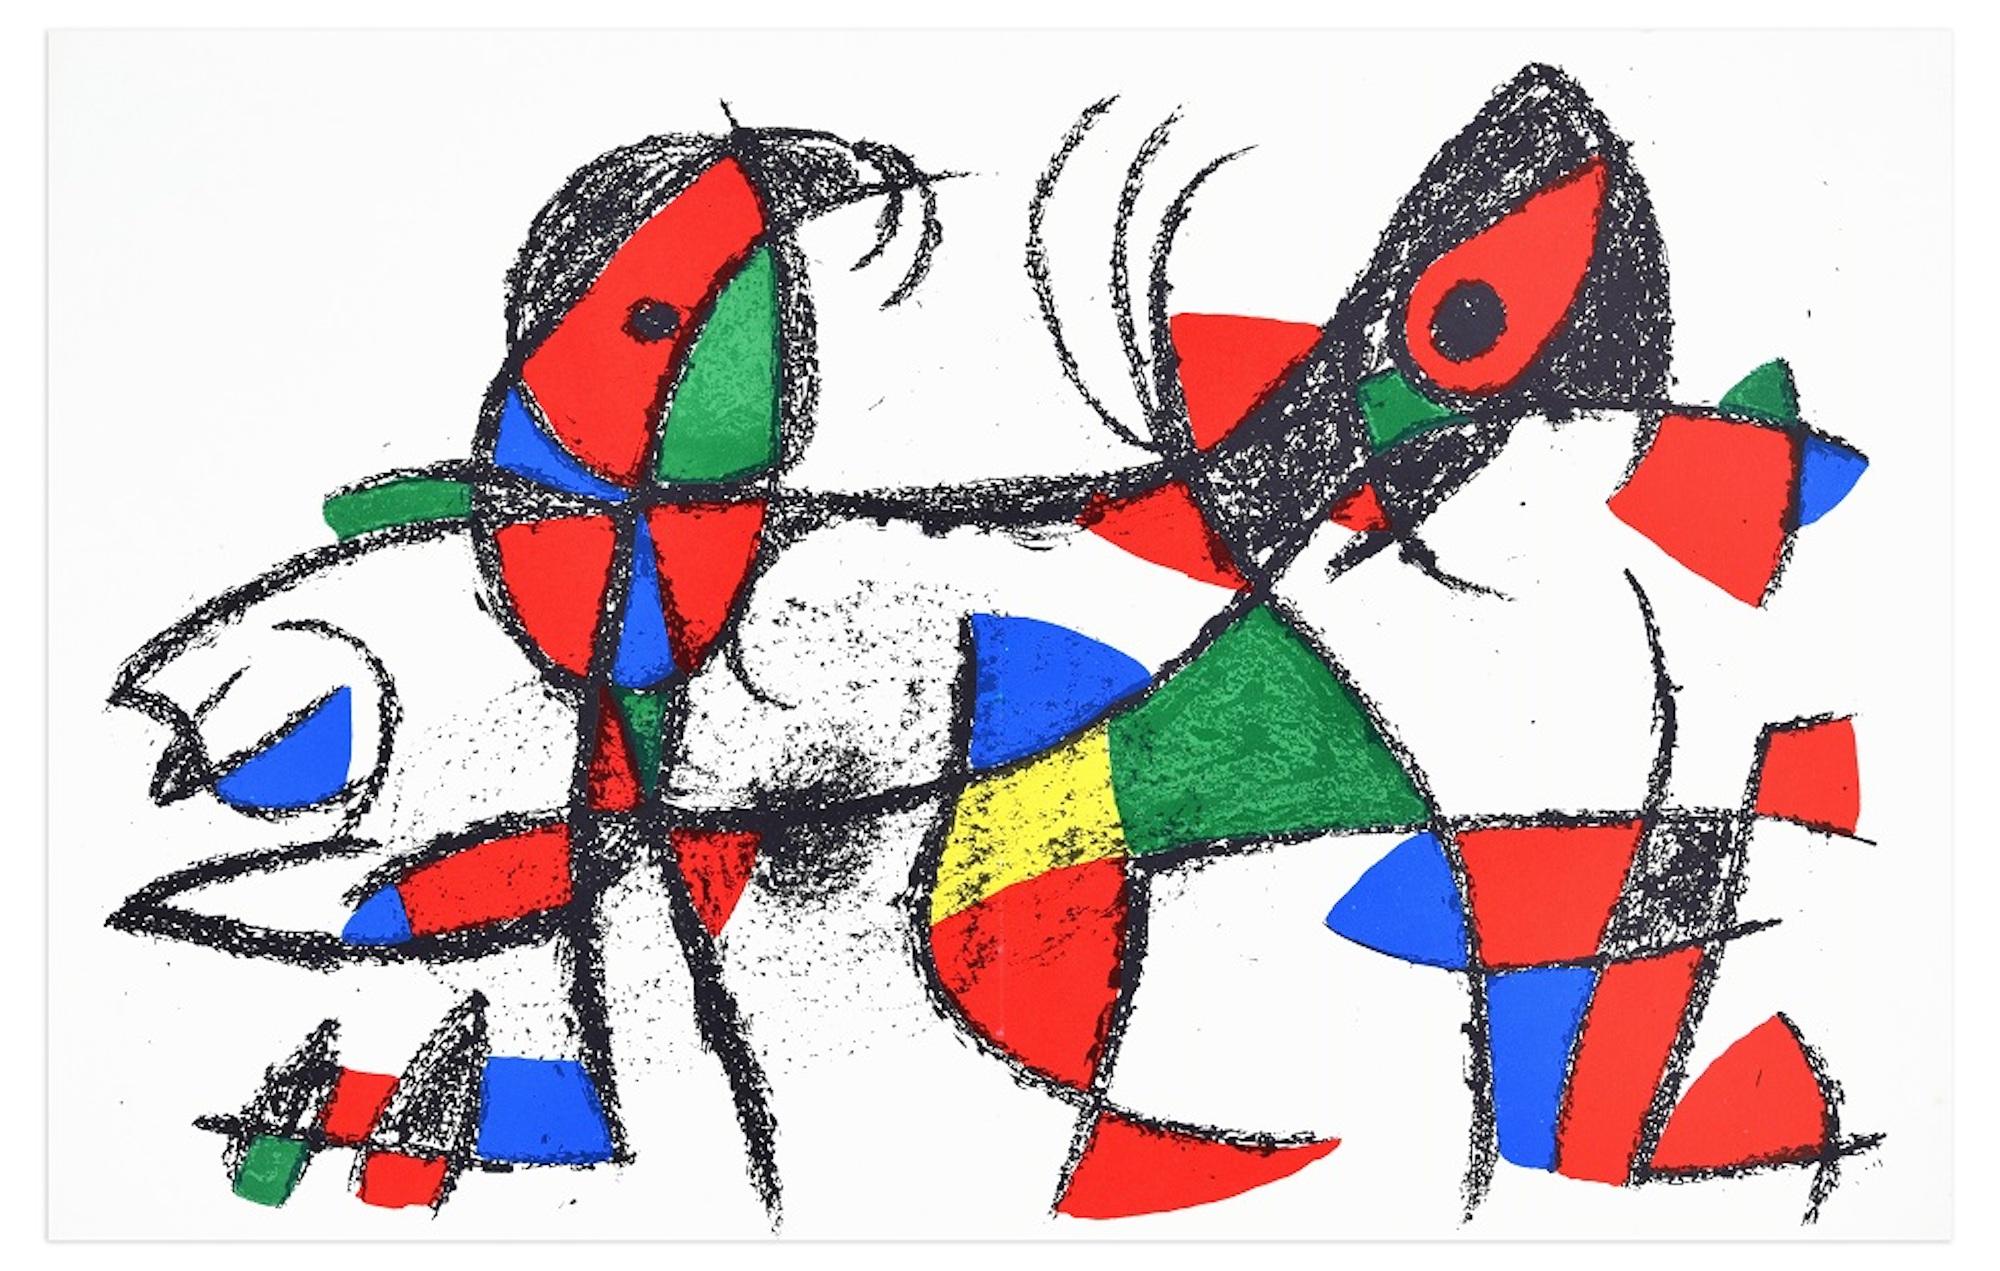 Composition X - Lithograph by Joan Mirò - 1974